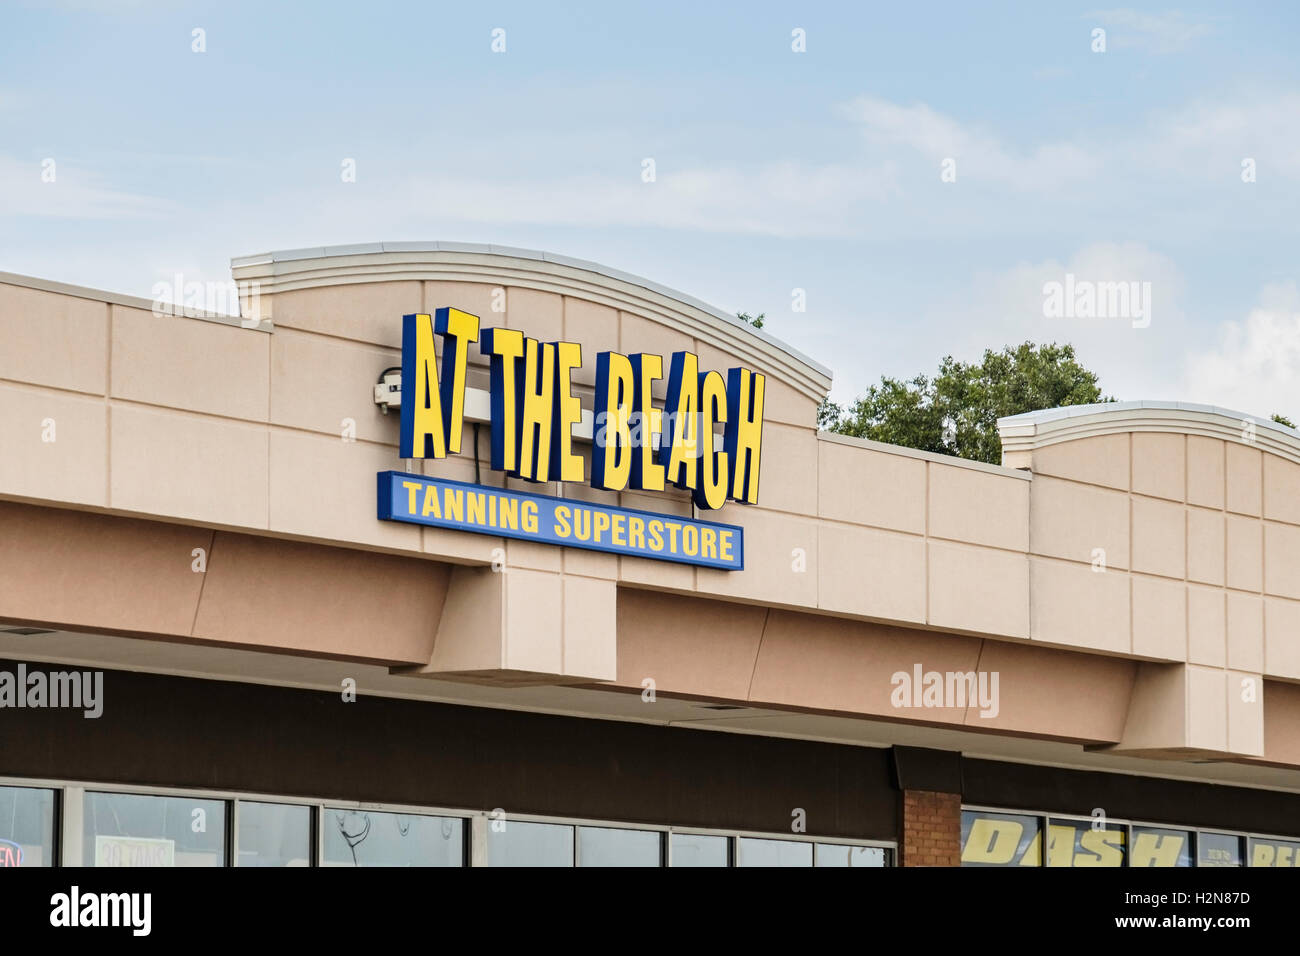 The exterior logo and sign of At The Beach, a tanning superstore located at 2108 SW 74th, Oklahoma City, Oklahoma, USA. Stock Photo